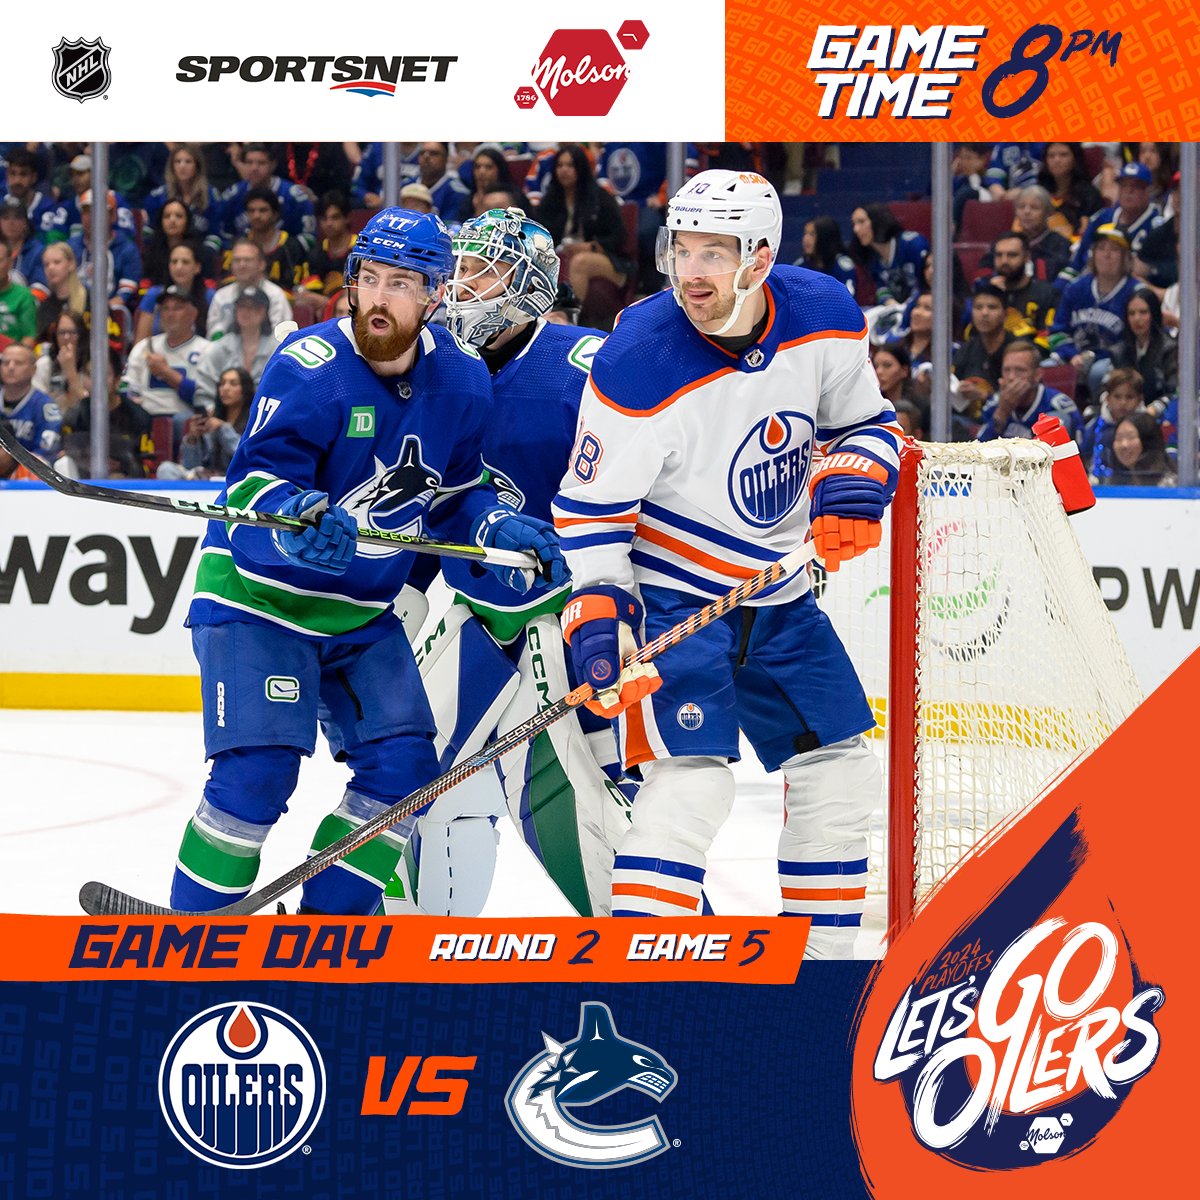 PLAYOFF GAME DAY! The #Oilers are back in Vancouver for Game 5 of Round 2. ⏰ 8pm MT 📺 @Sportsnet 📻 @630CHED #LetsGoOilers